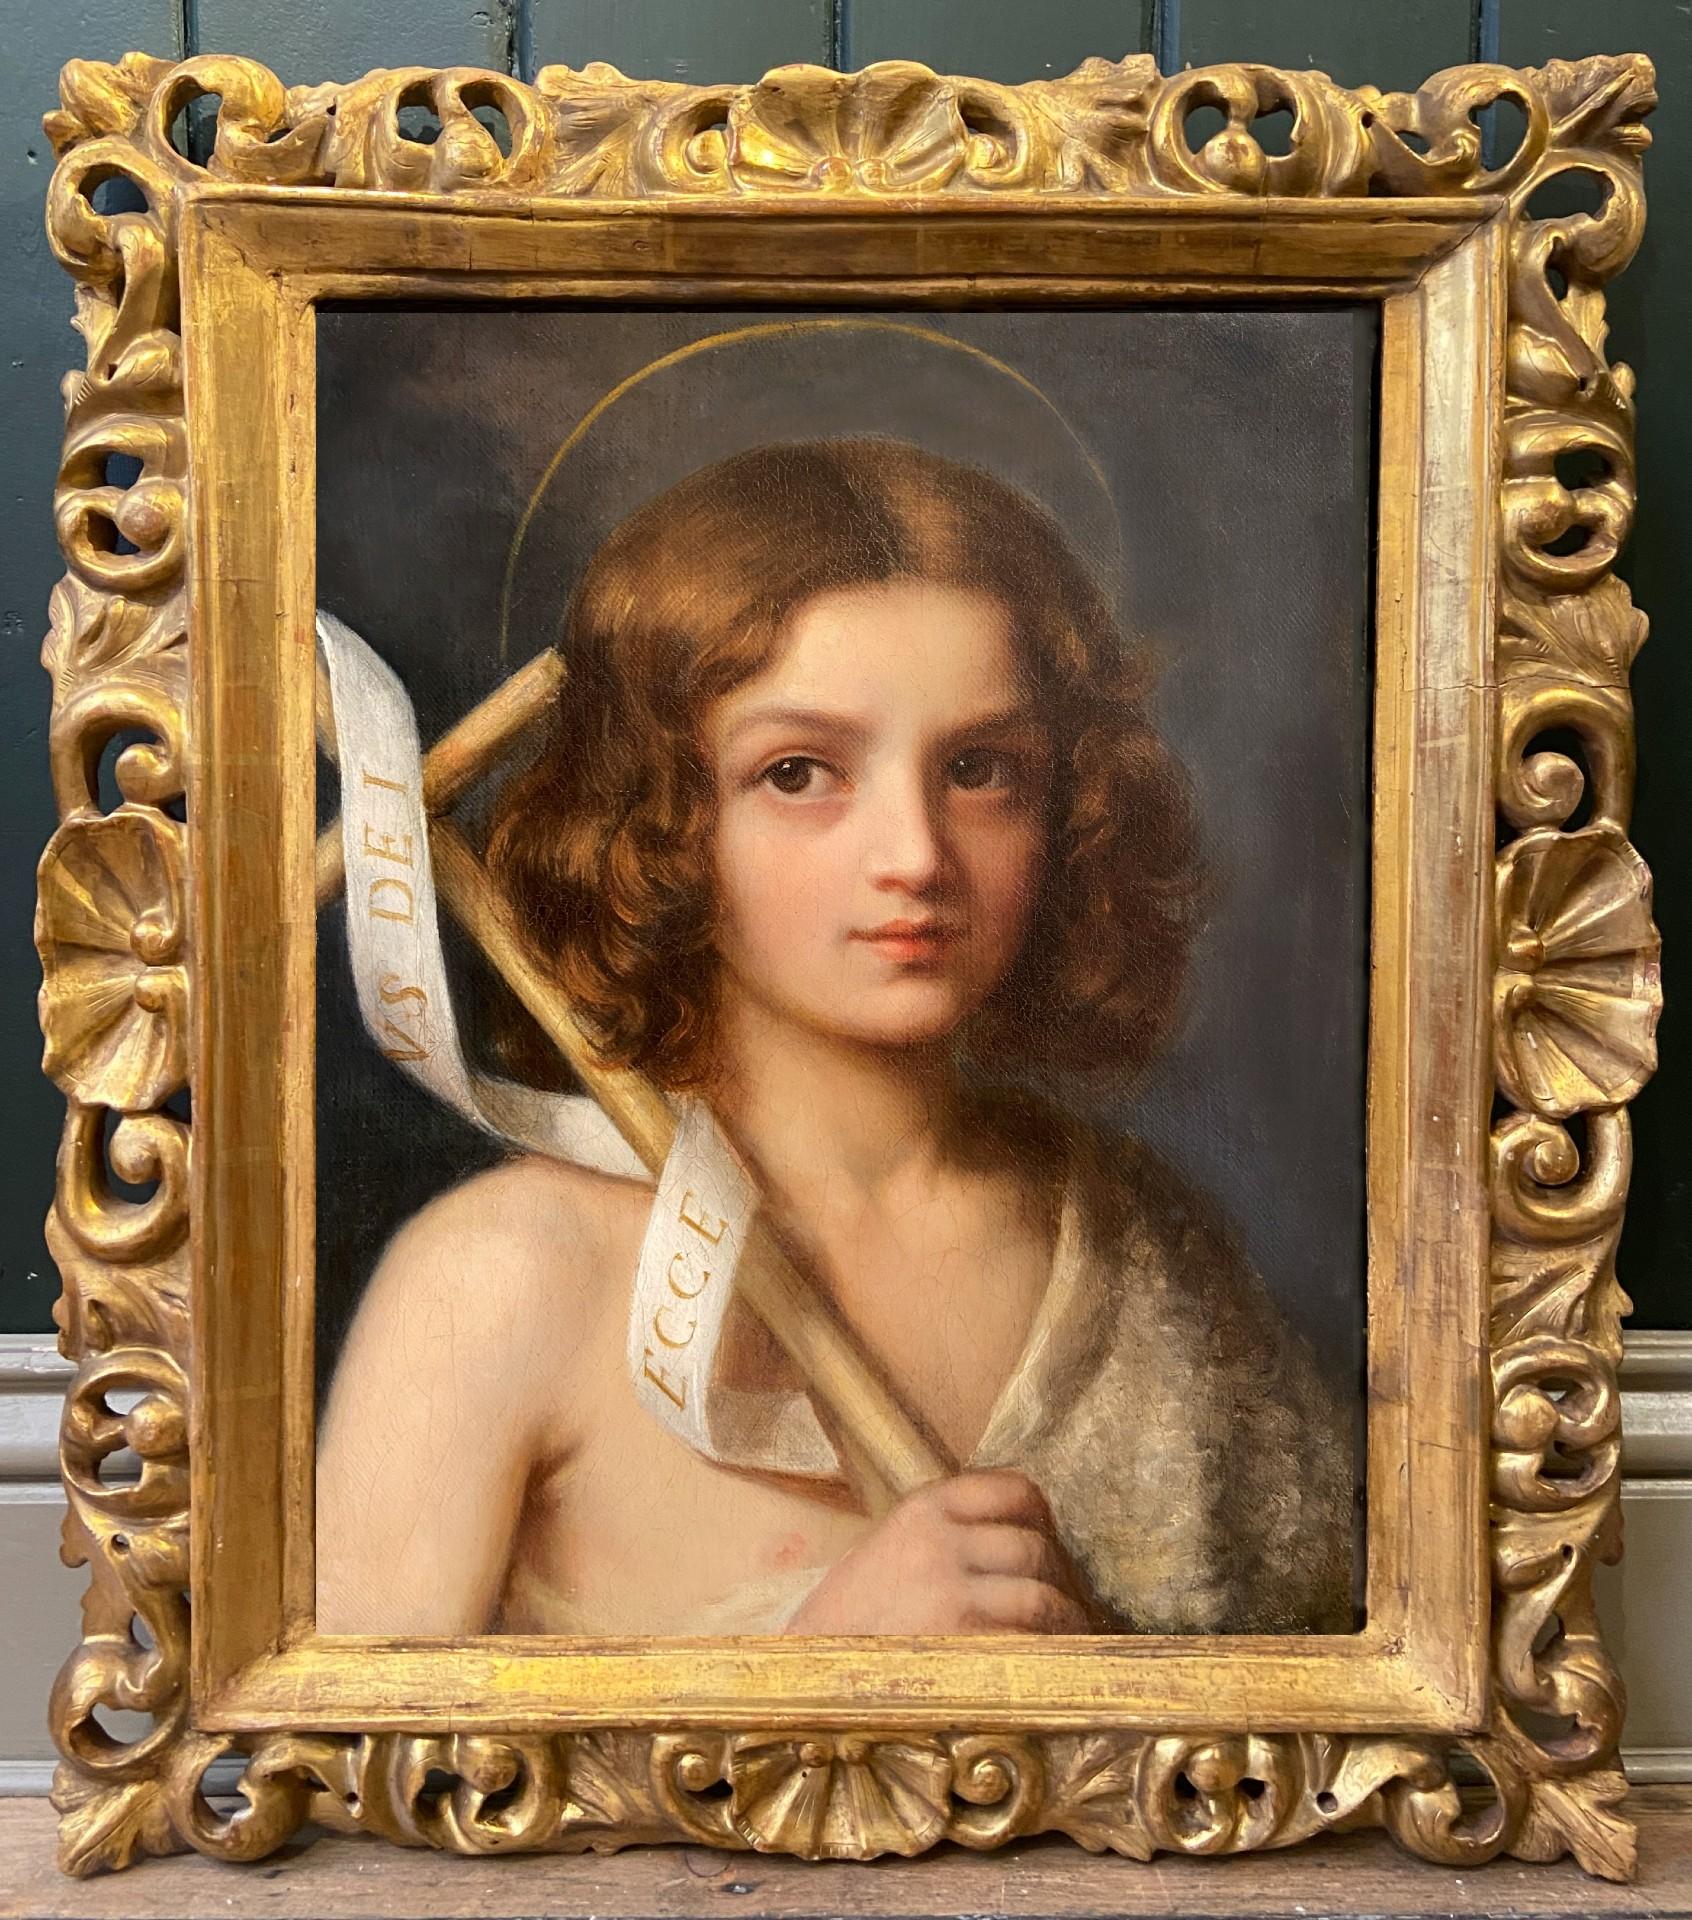 St John the Baptist as a Child, Early 19th Century Italian School, Oil Painting - Brown Portrait Painting by 19th century Italian School